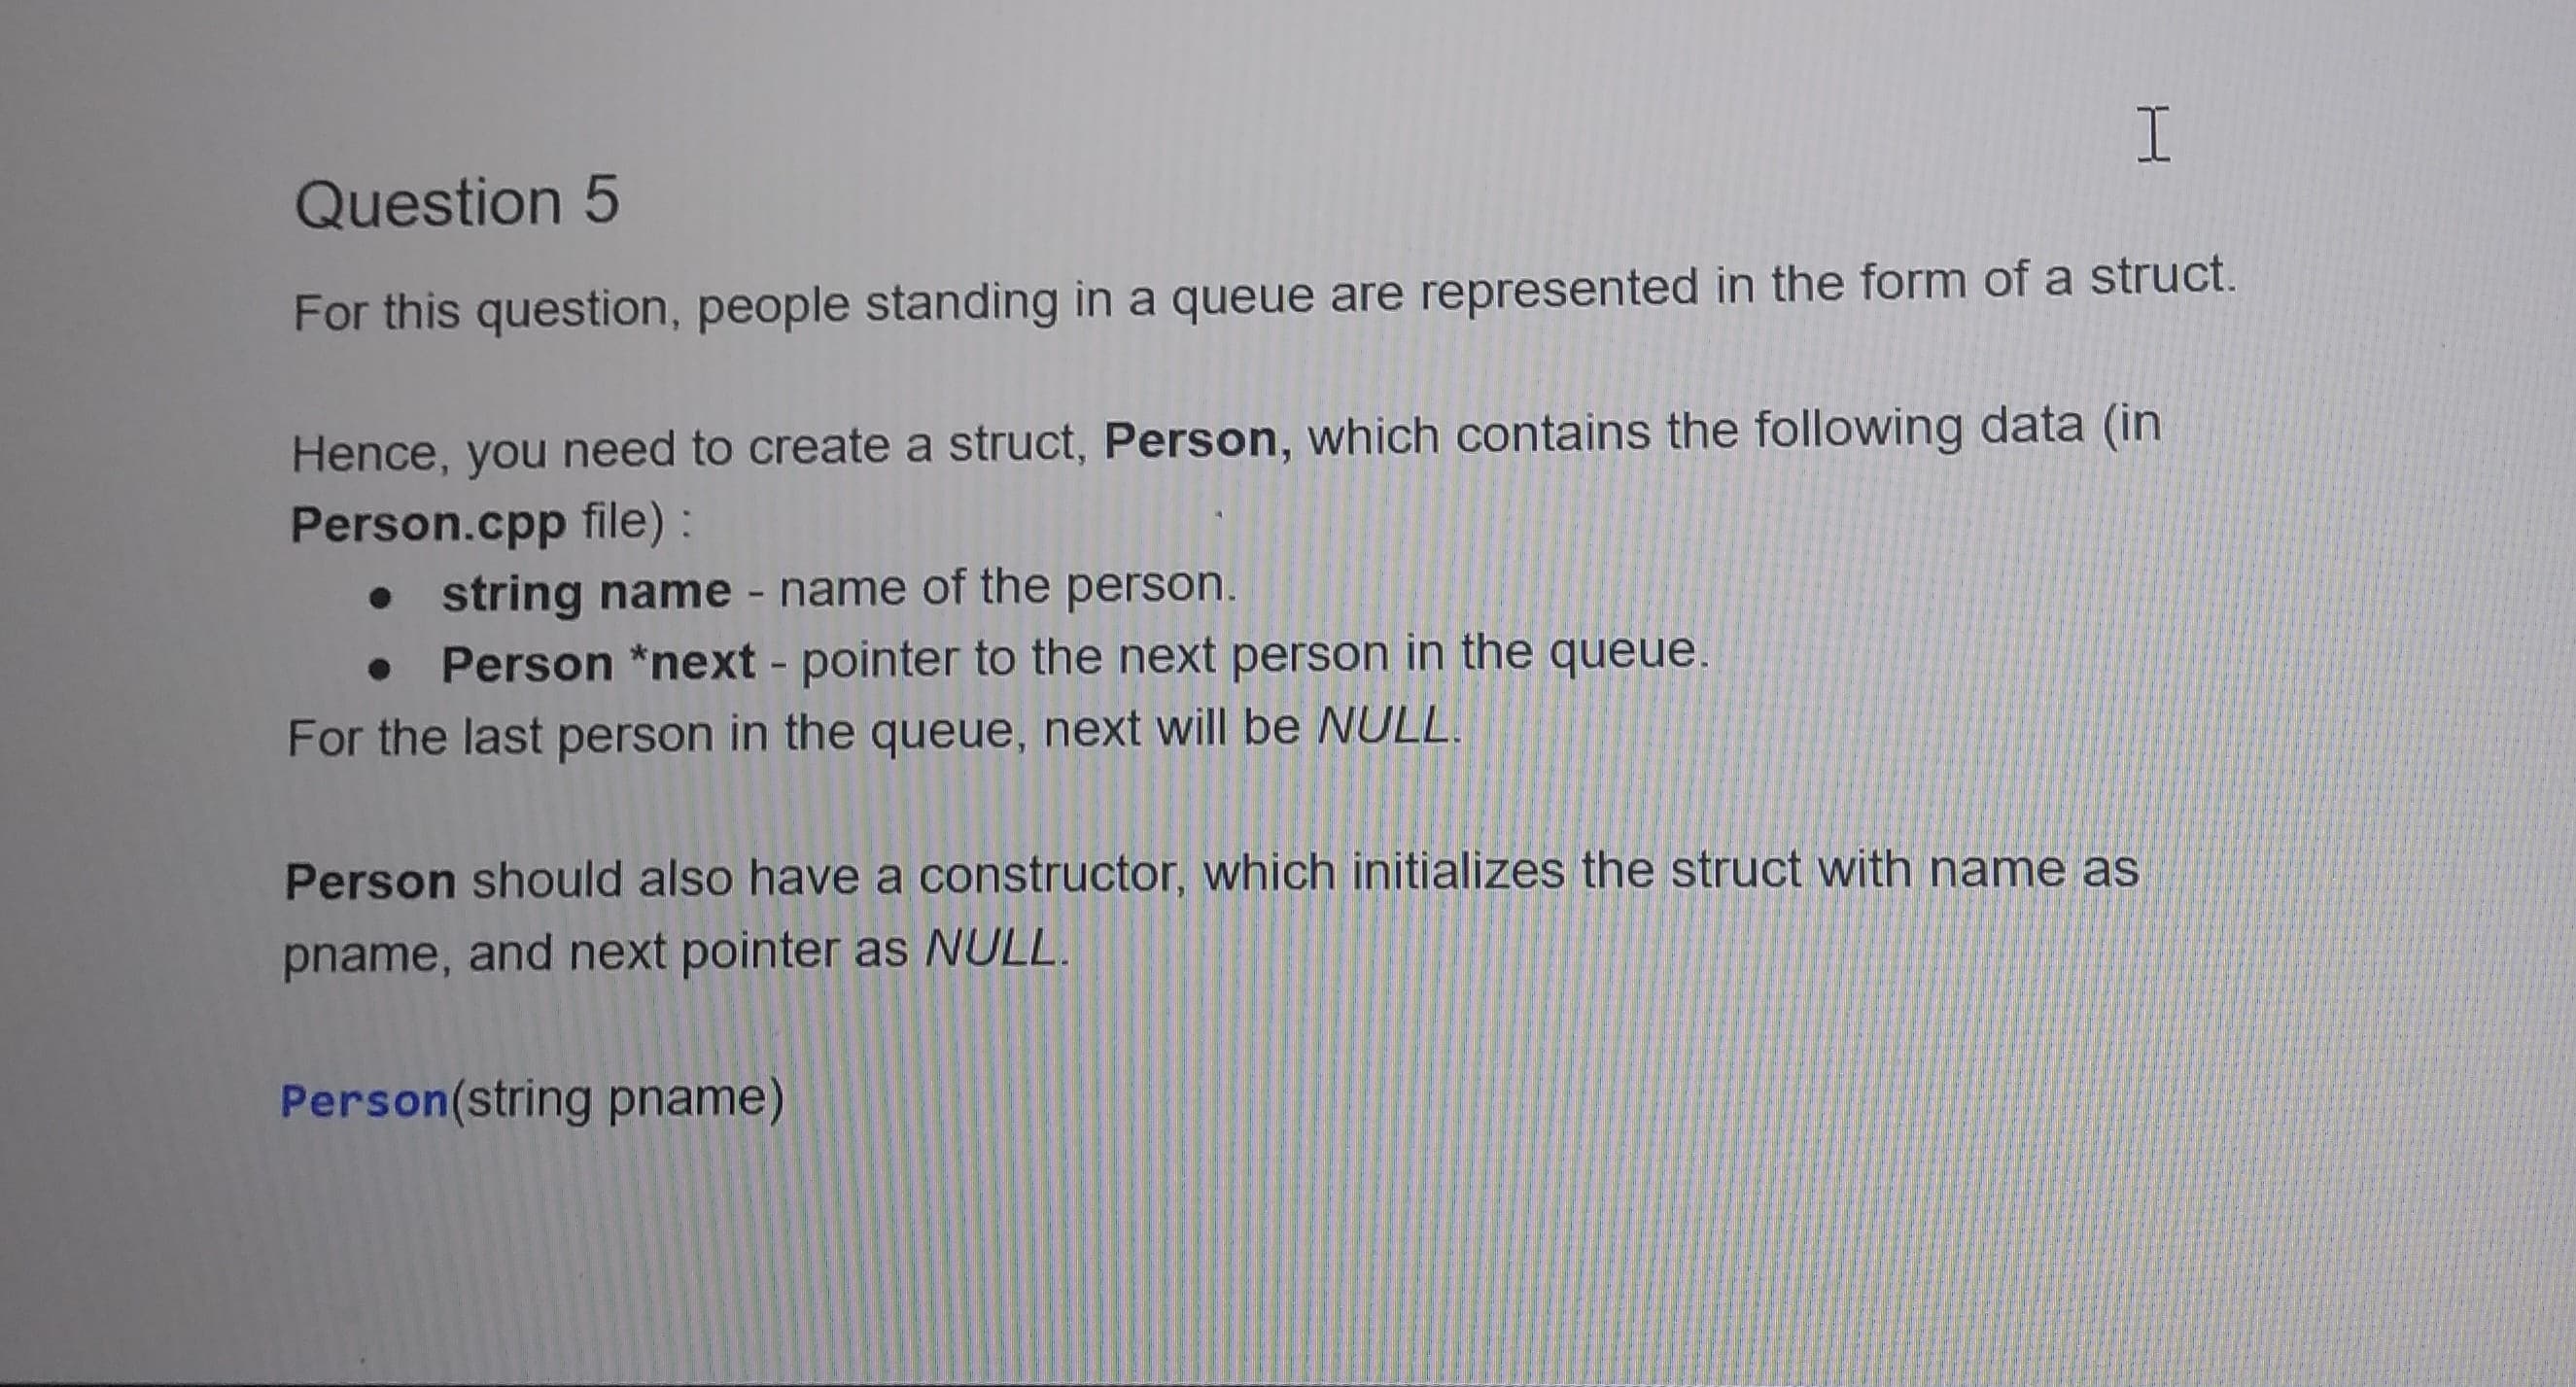 For this question, people standing in a queue are represented in the form of a struct.
Hence, you need to create a struct, Person, which contains the following data (in
Person.cpp file):
• string name name of the person.
Person *next - pointer to the next person in the queue.
For the last person in the queue, next will be NULL.
